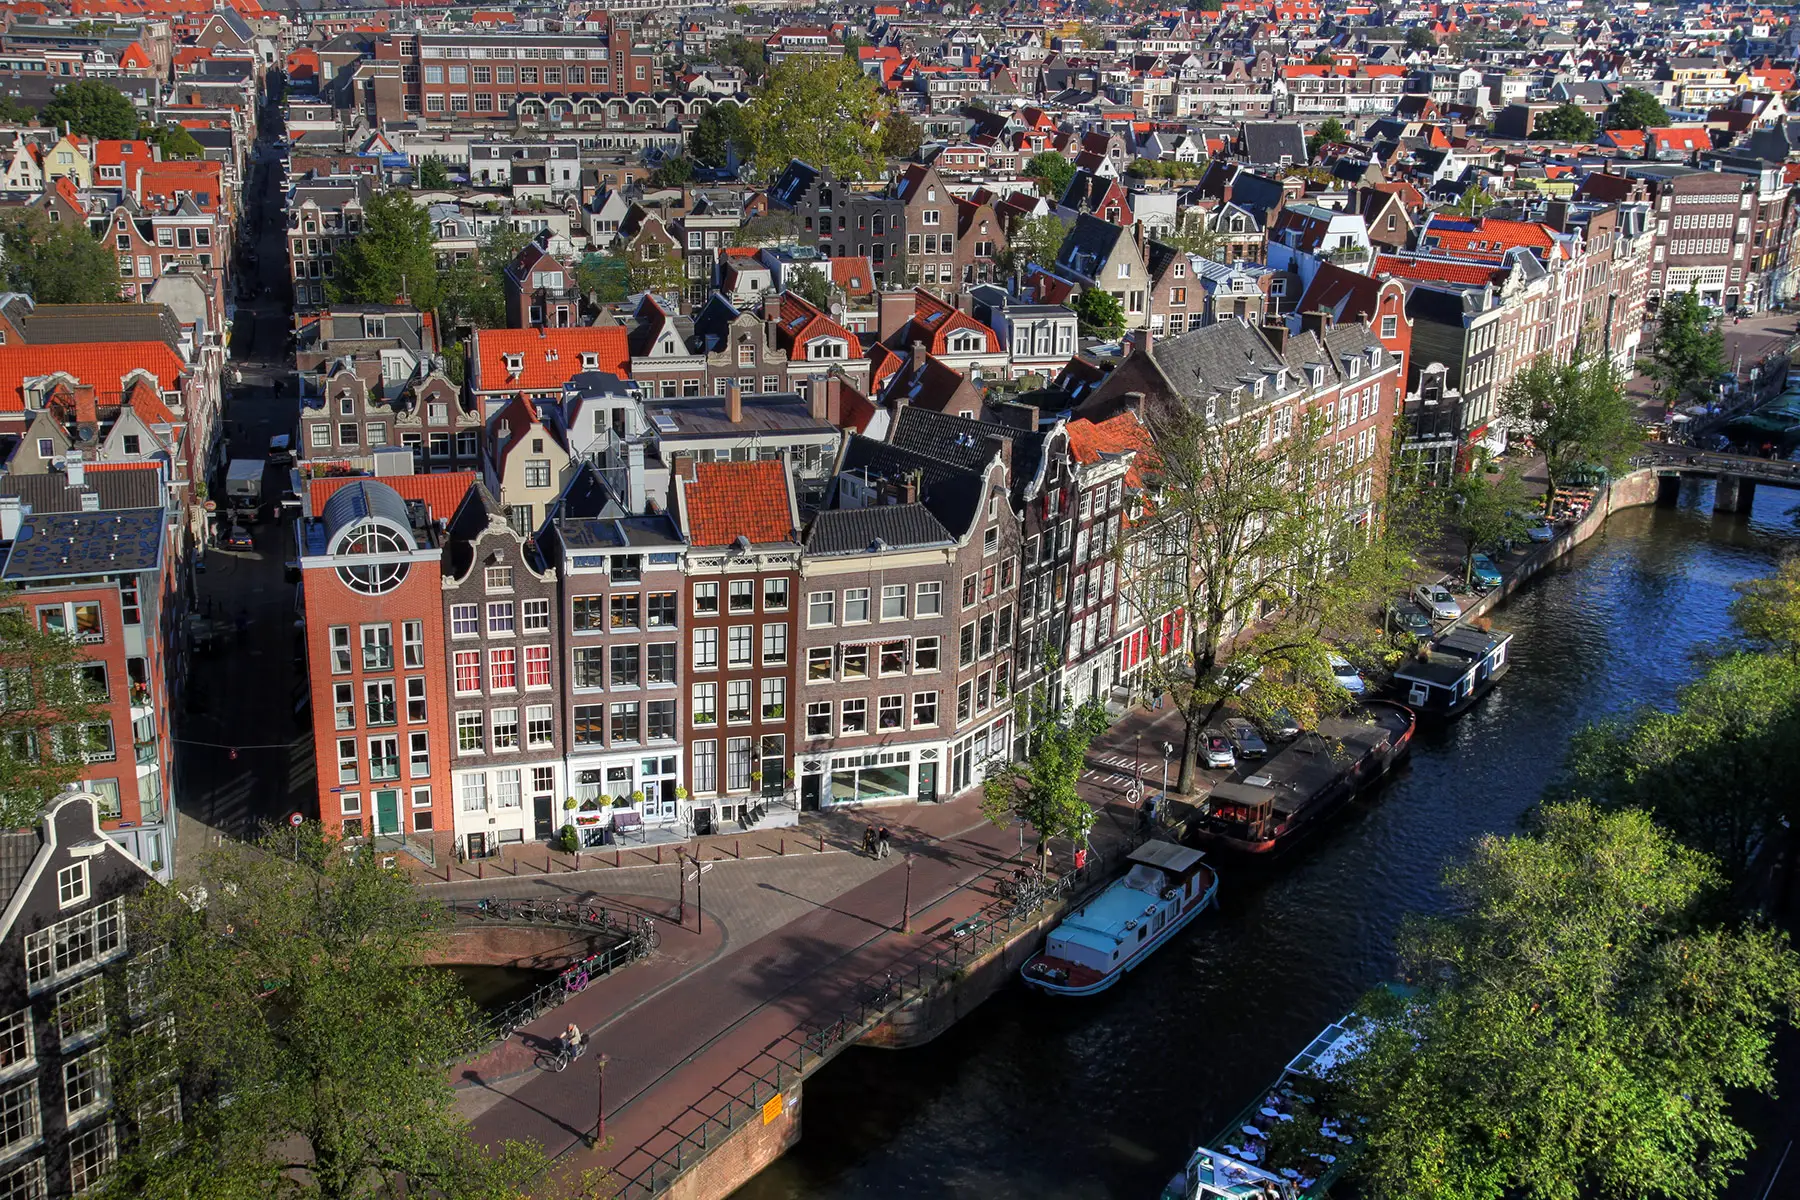 An aerial view of canal houses in Amsterdam